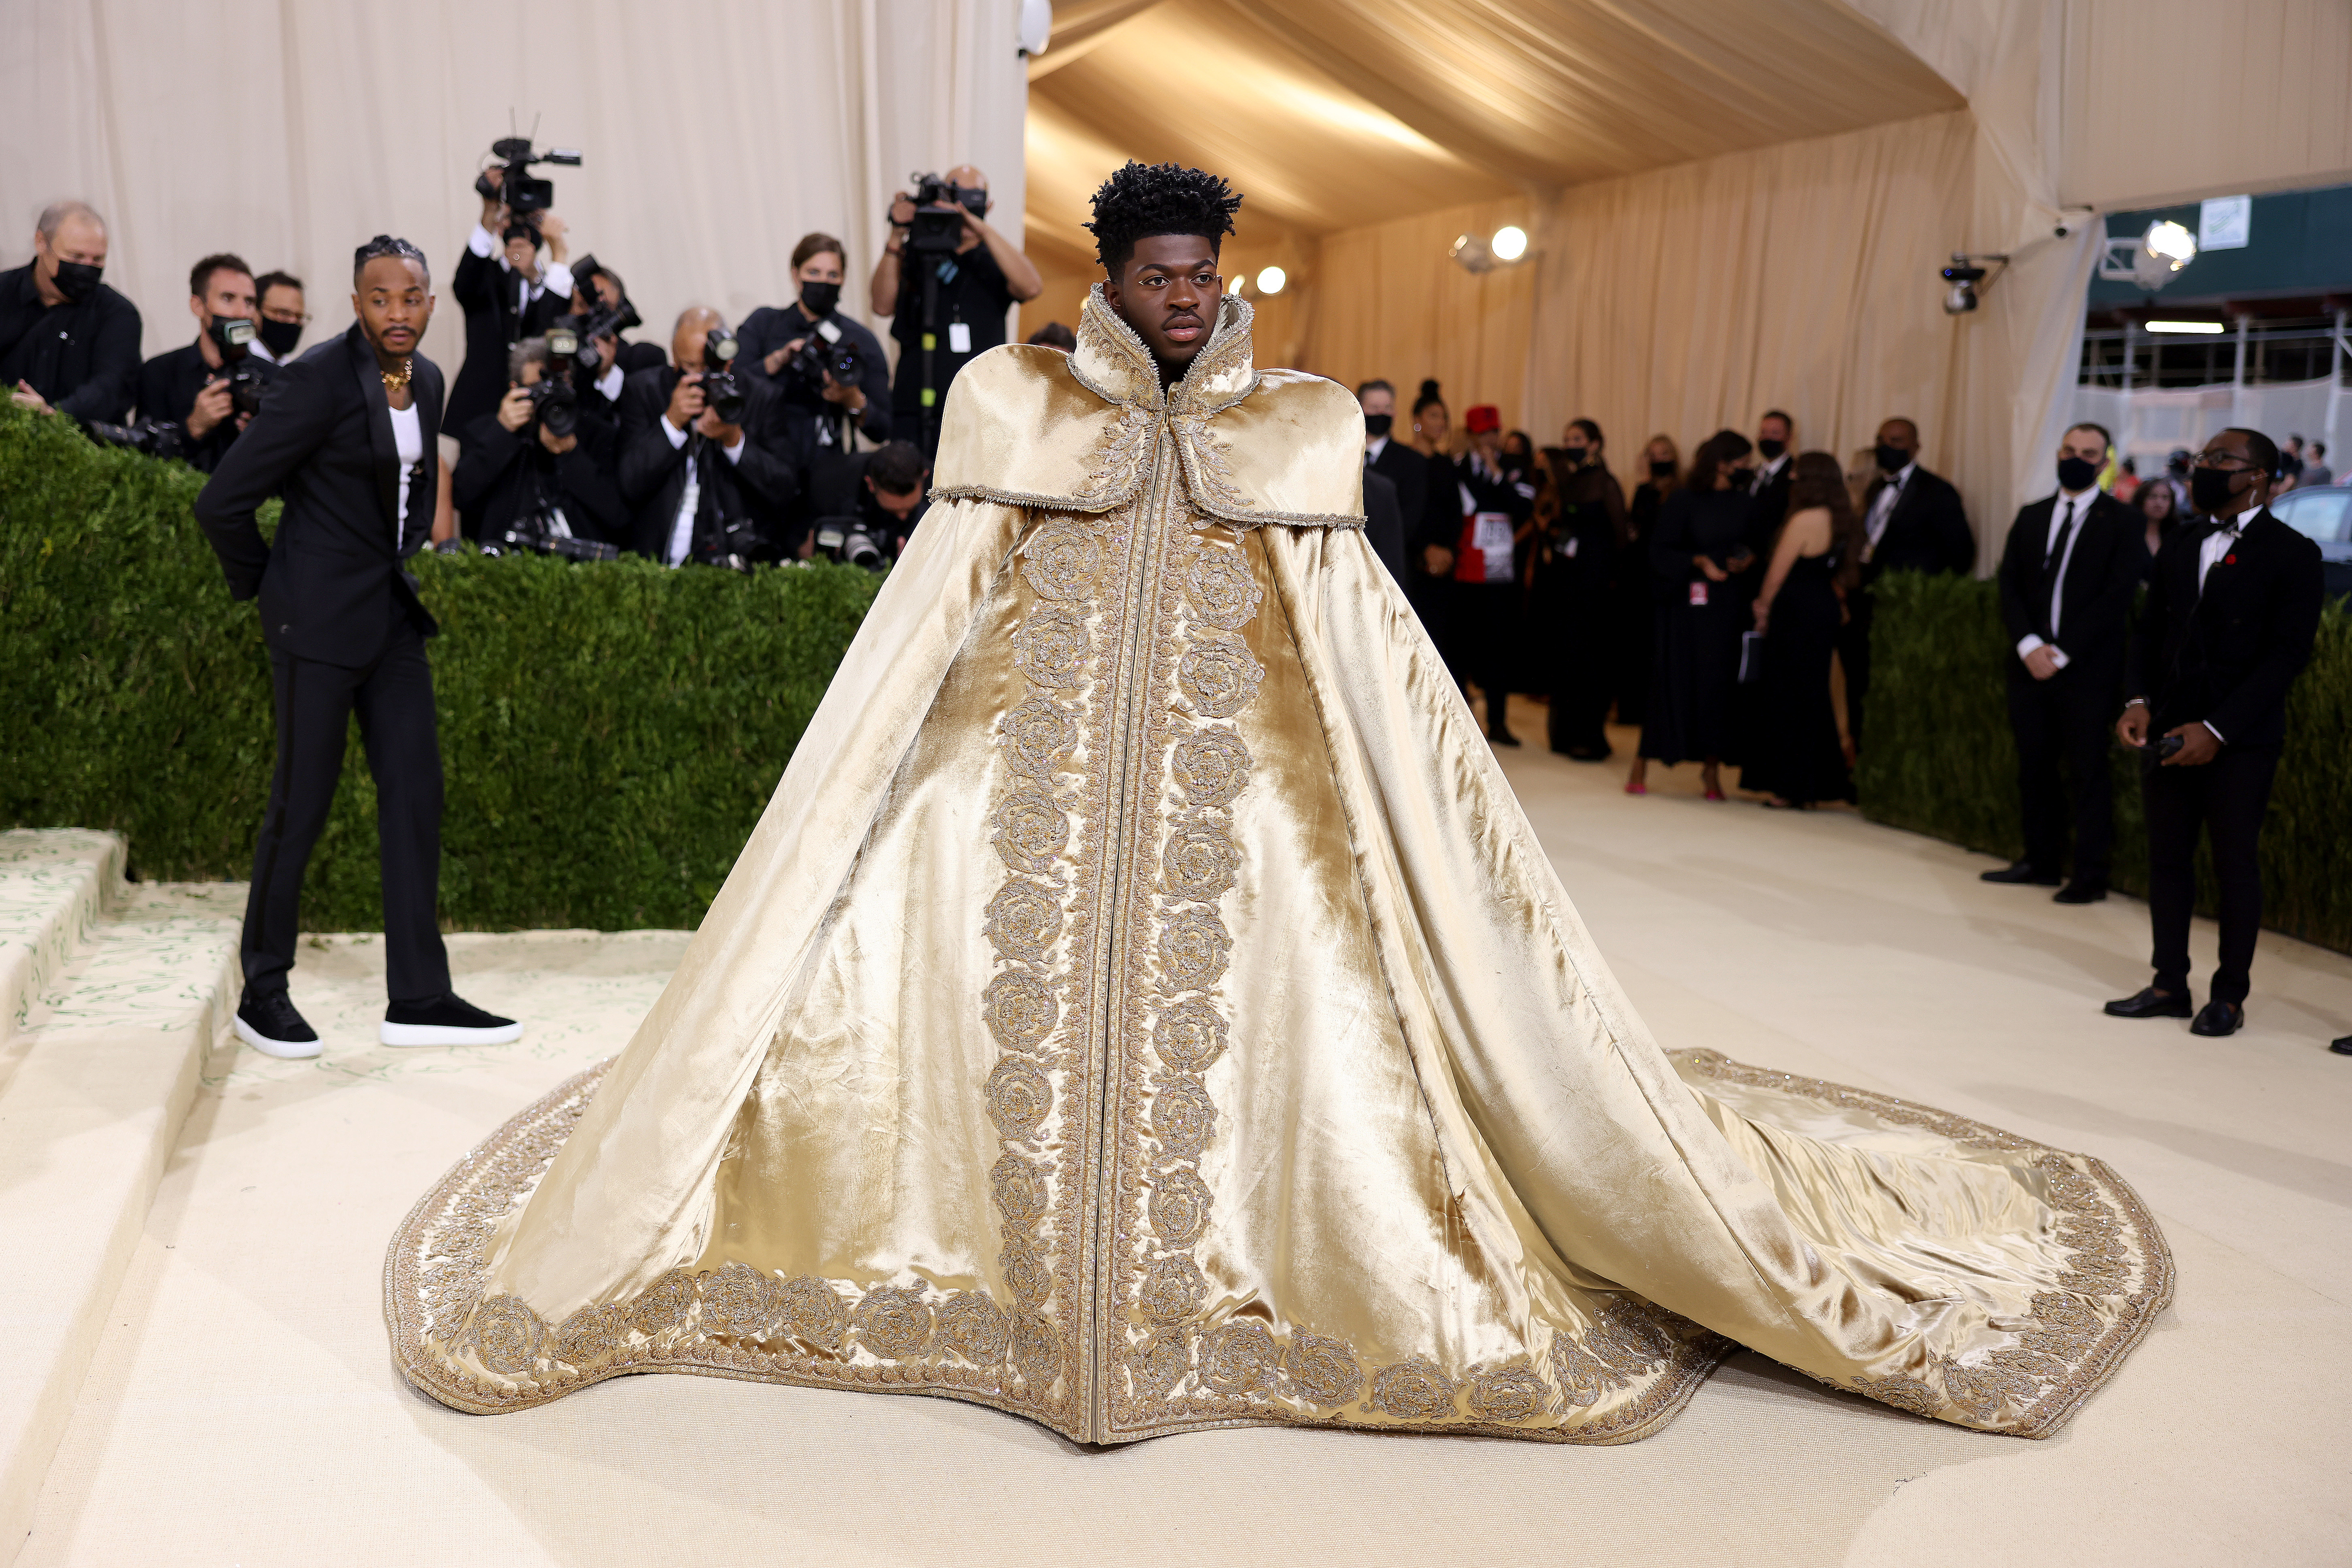 Lil Nas X in an elaborate oversized coat with ornate details